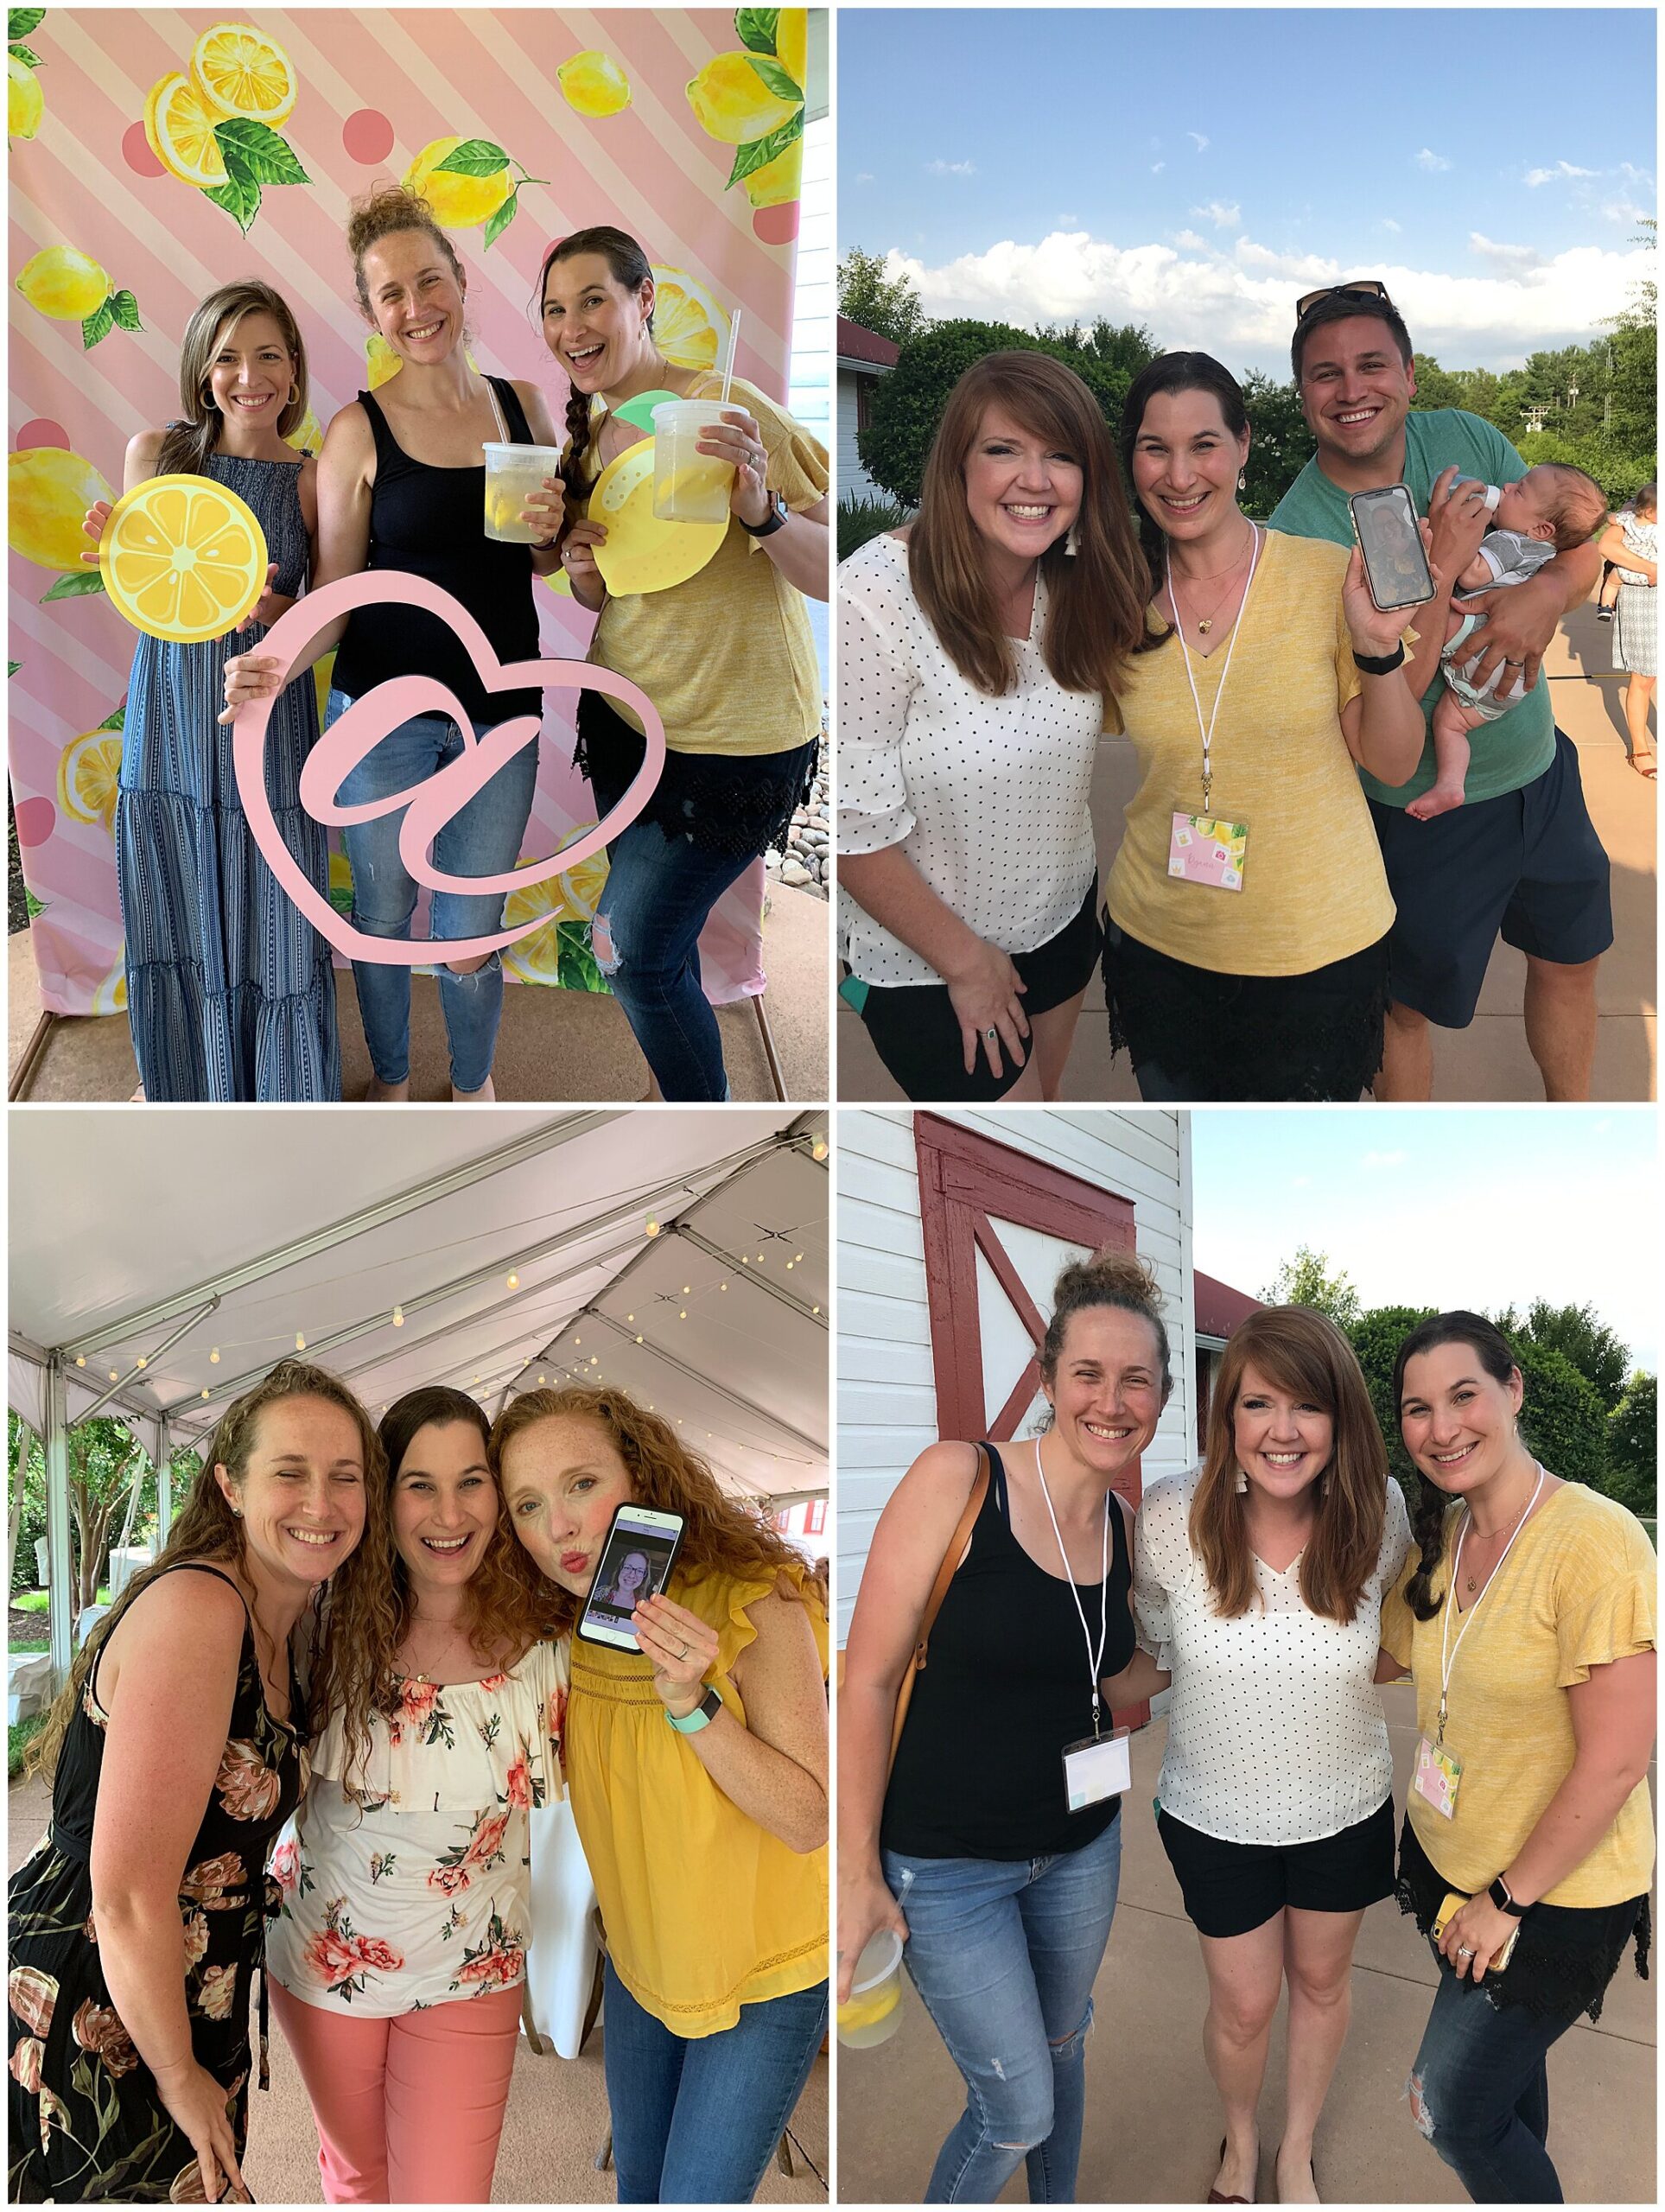  Creative at heart was just AMAZING! Lauren and I had such a great time! Meeting Katelyn James and Lara Casey was incredible!  